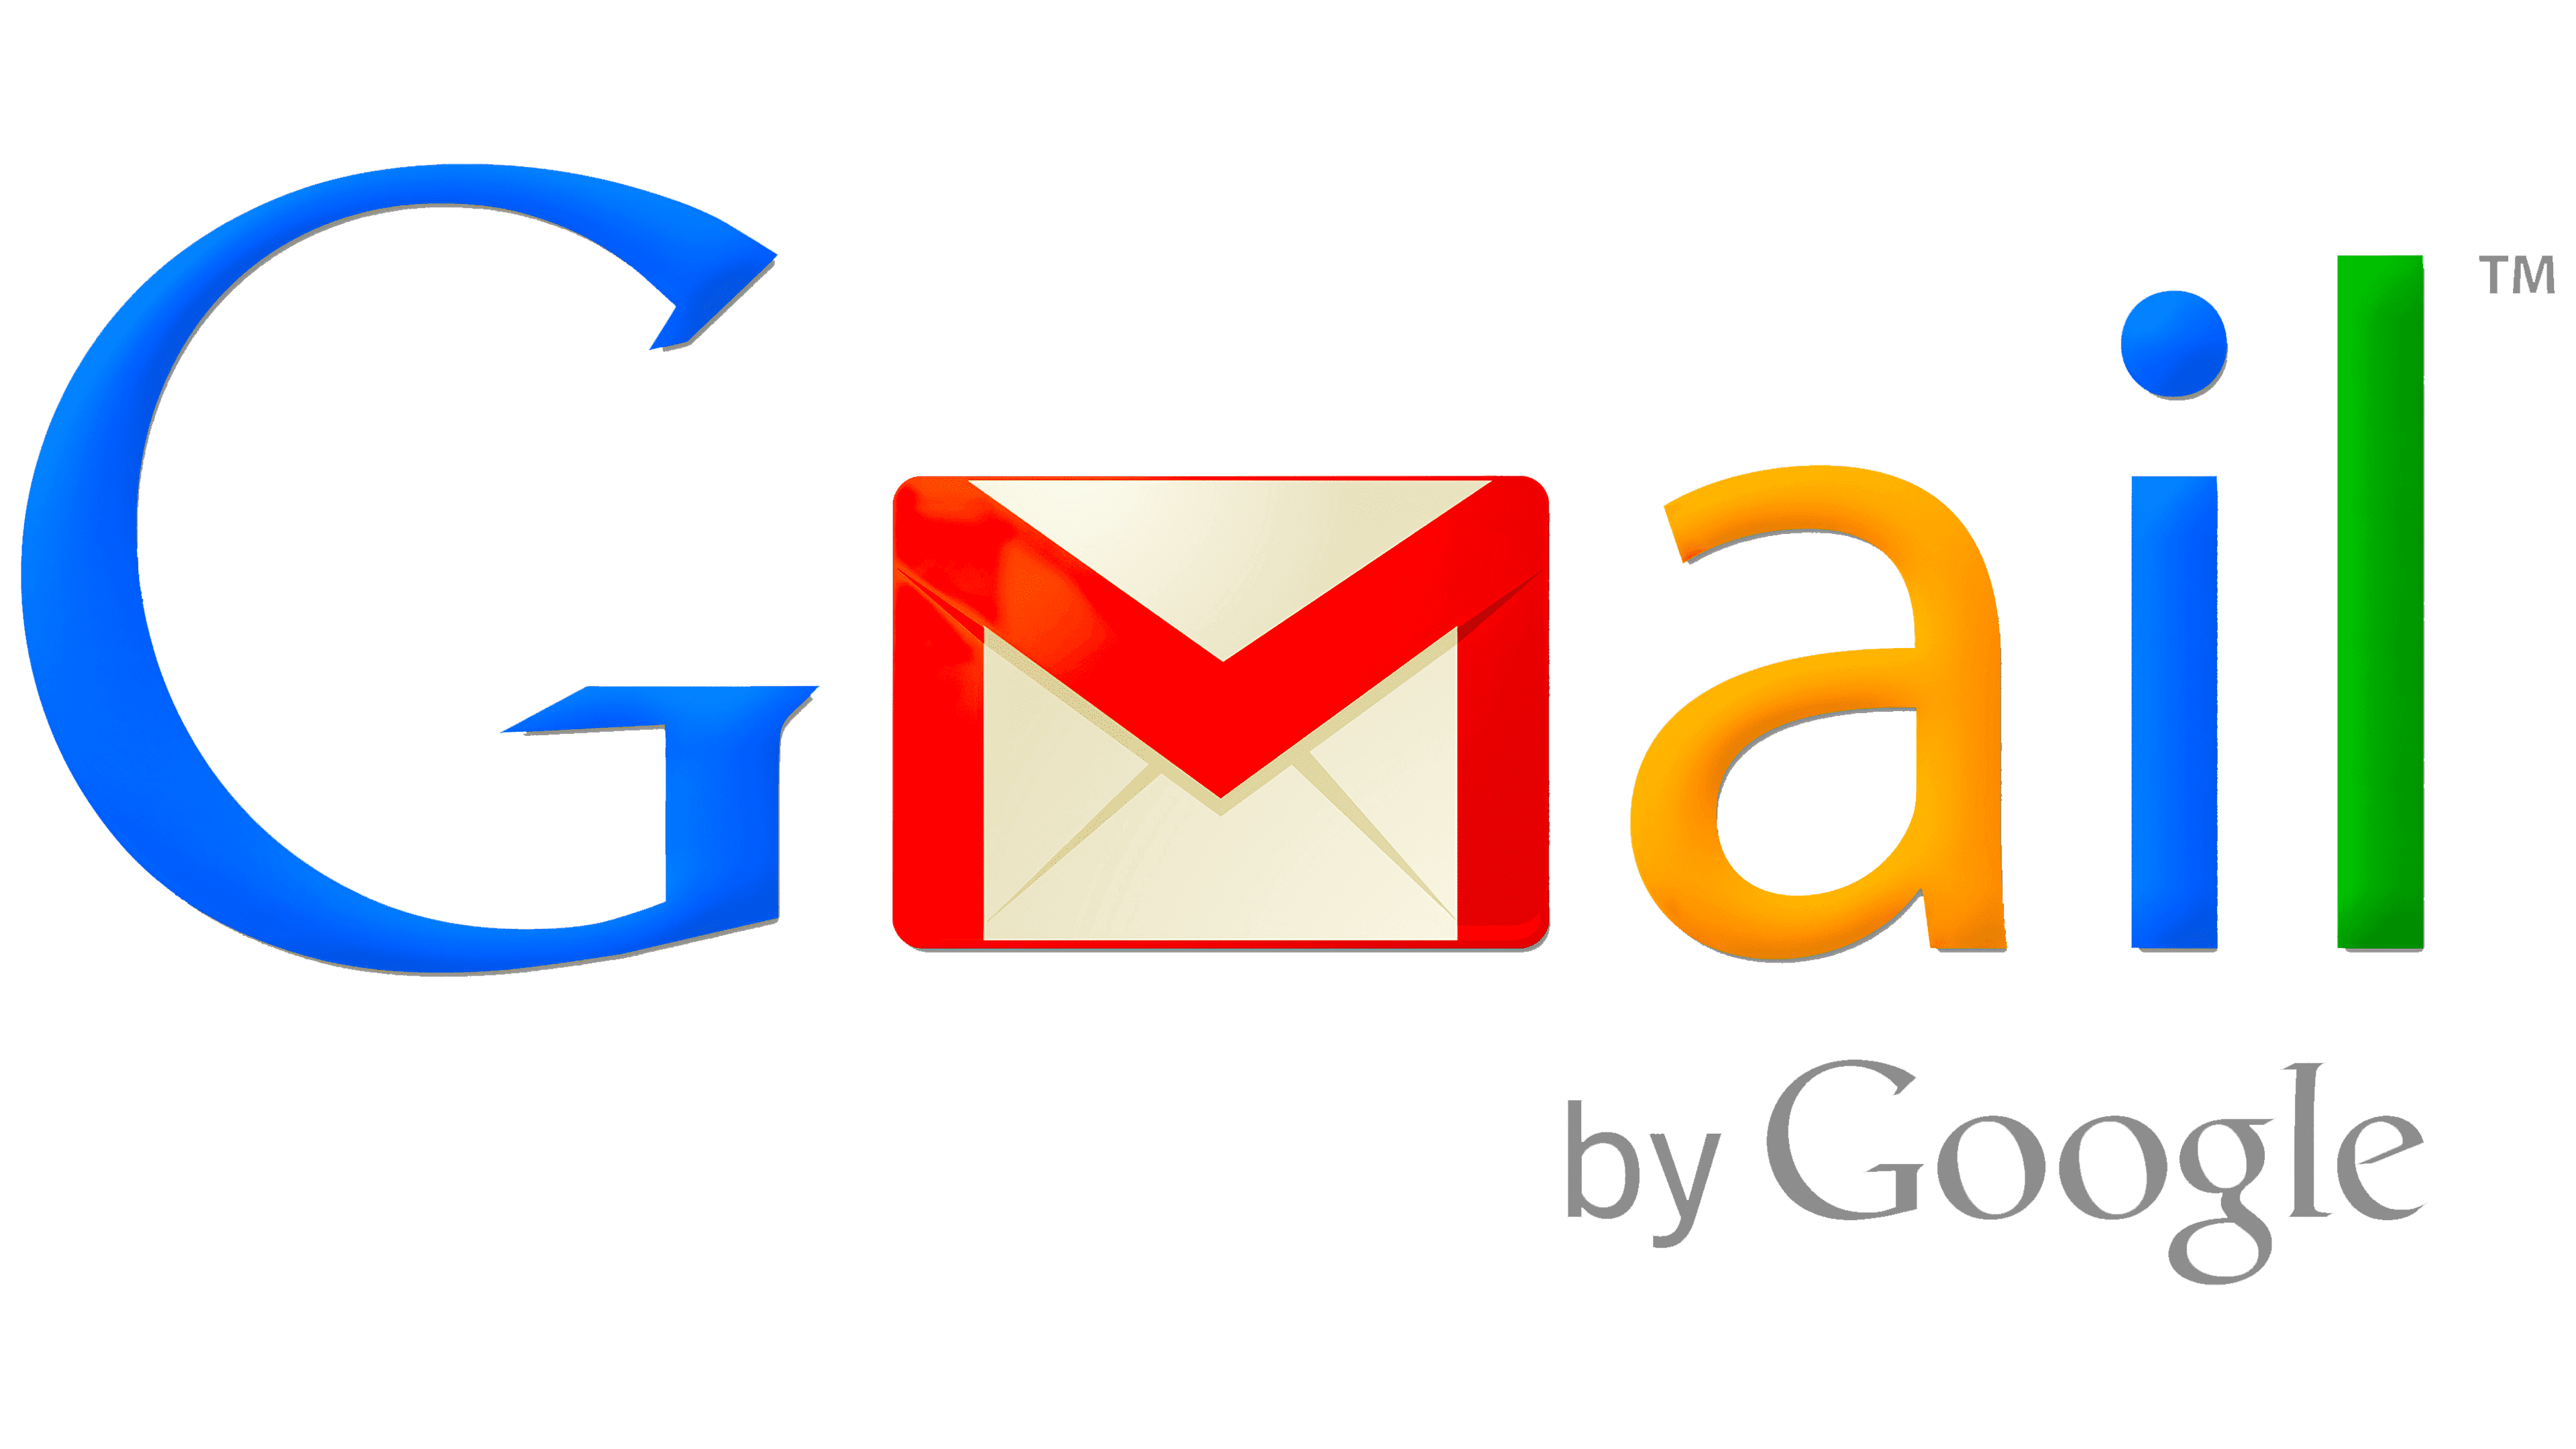 gmail Vector Icons free download in SVG, PNG Format